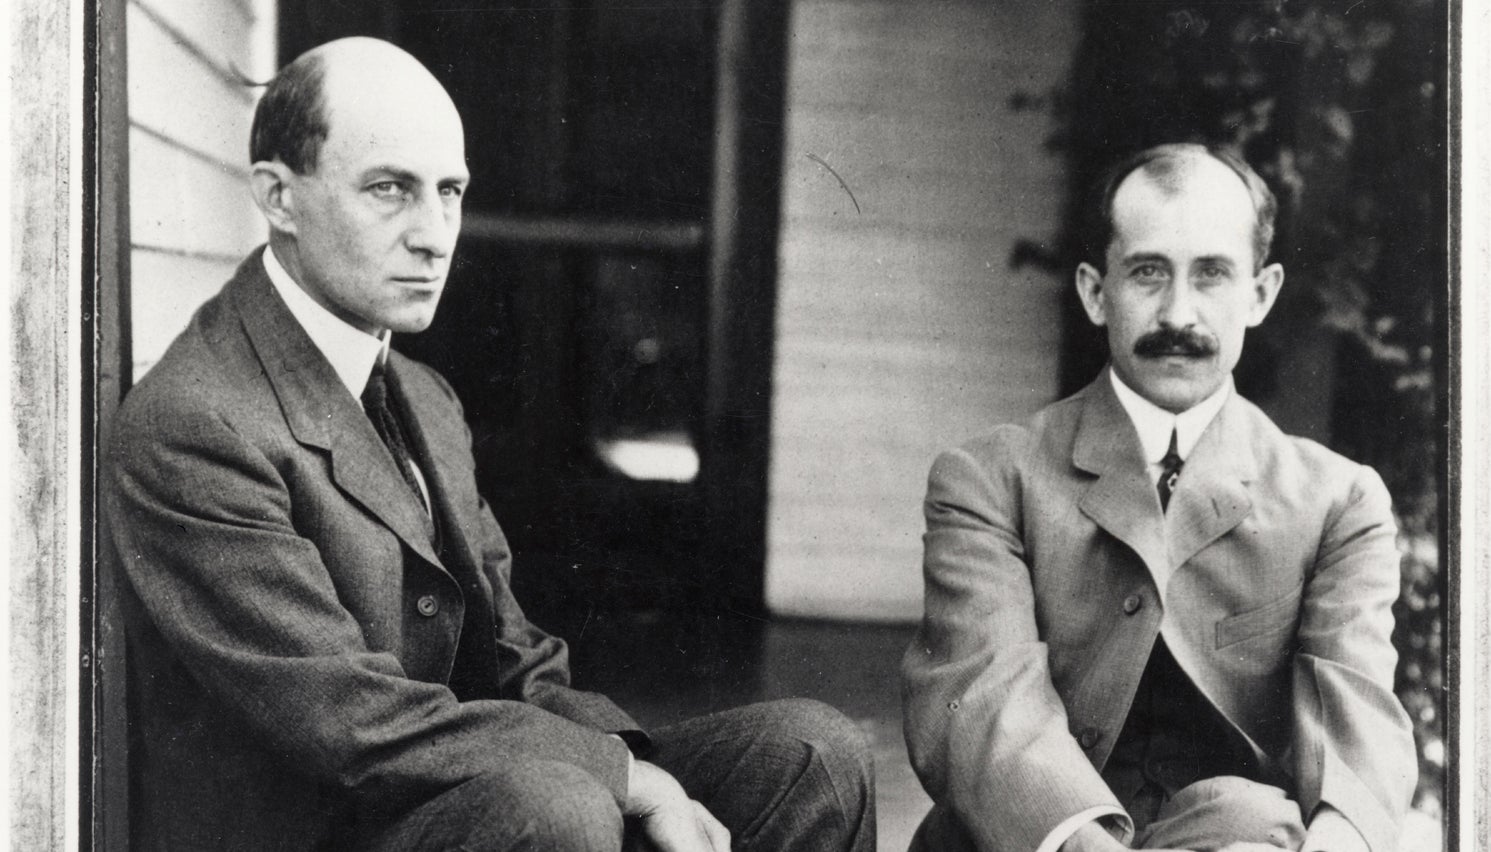 Portrait of Wilbur and Orville Wright seated outside